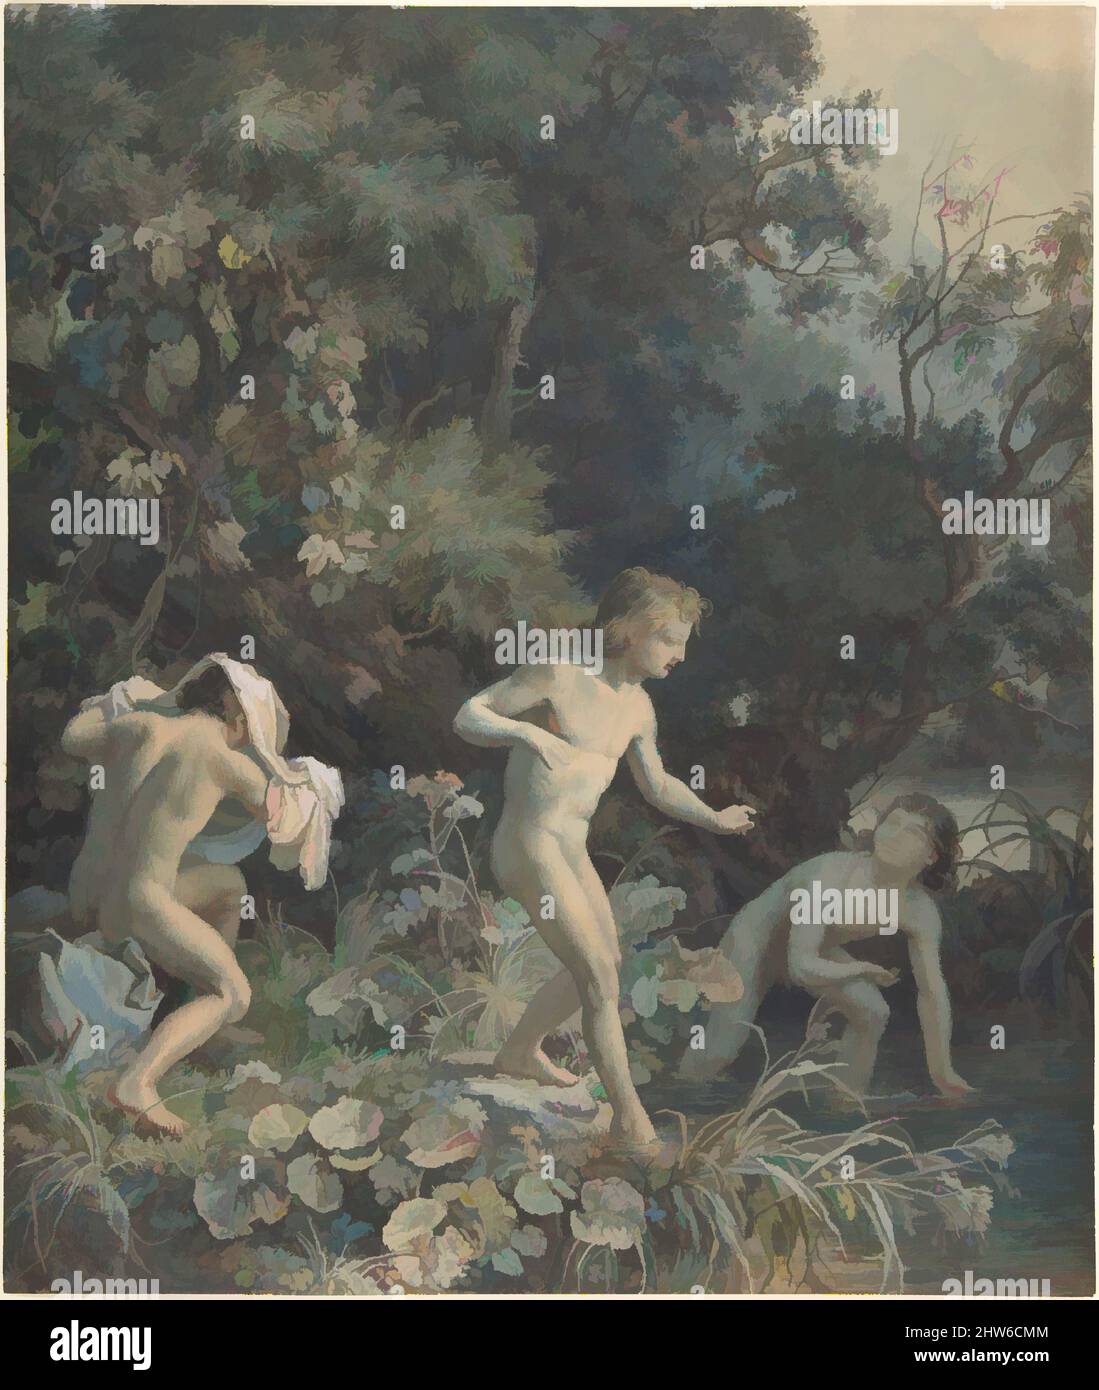 Art inspired by Riverside with Three Bathing Boys, 19th century, Watercolor and bodycolor, sheet: 13 7/16 x 11 7/16 in. (34.2 x 29 cm), Drawings, Christian Friedrich Gille (German, Ballenstedt 1805–1899 Dresden, Classic works modernized by Artotop with a splash of modernity. Shapes, color and value, eye-catching visual impact on art. Emotions through freedom of artworks in a contemporary way. A timeless message pursuing a wildly creative new direction. Artists turning to the digital medium and creating the Artotop NFT Stock Photo